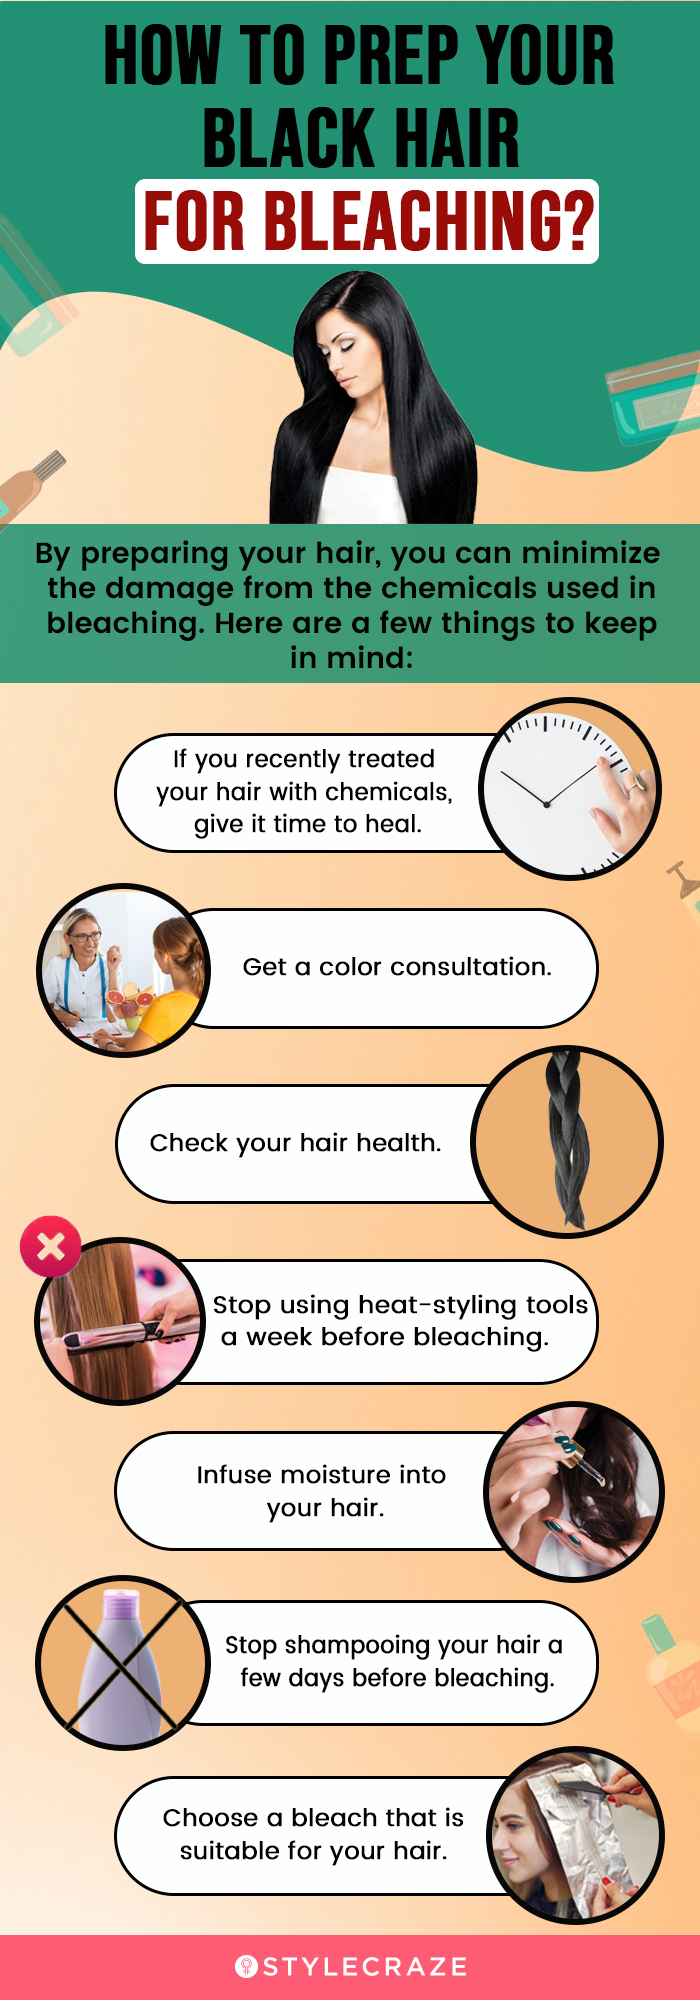 how to prep your hair for bleaching [infographic]